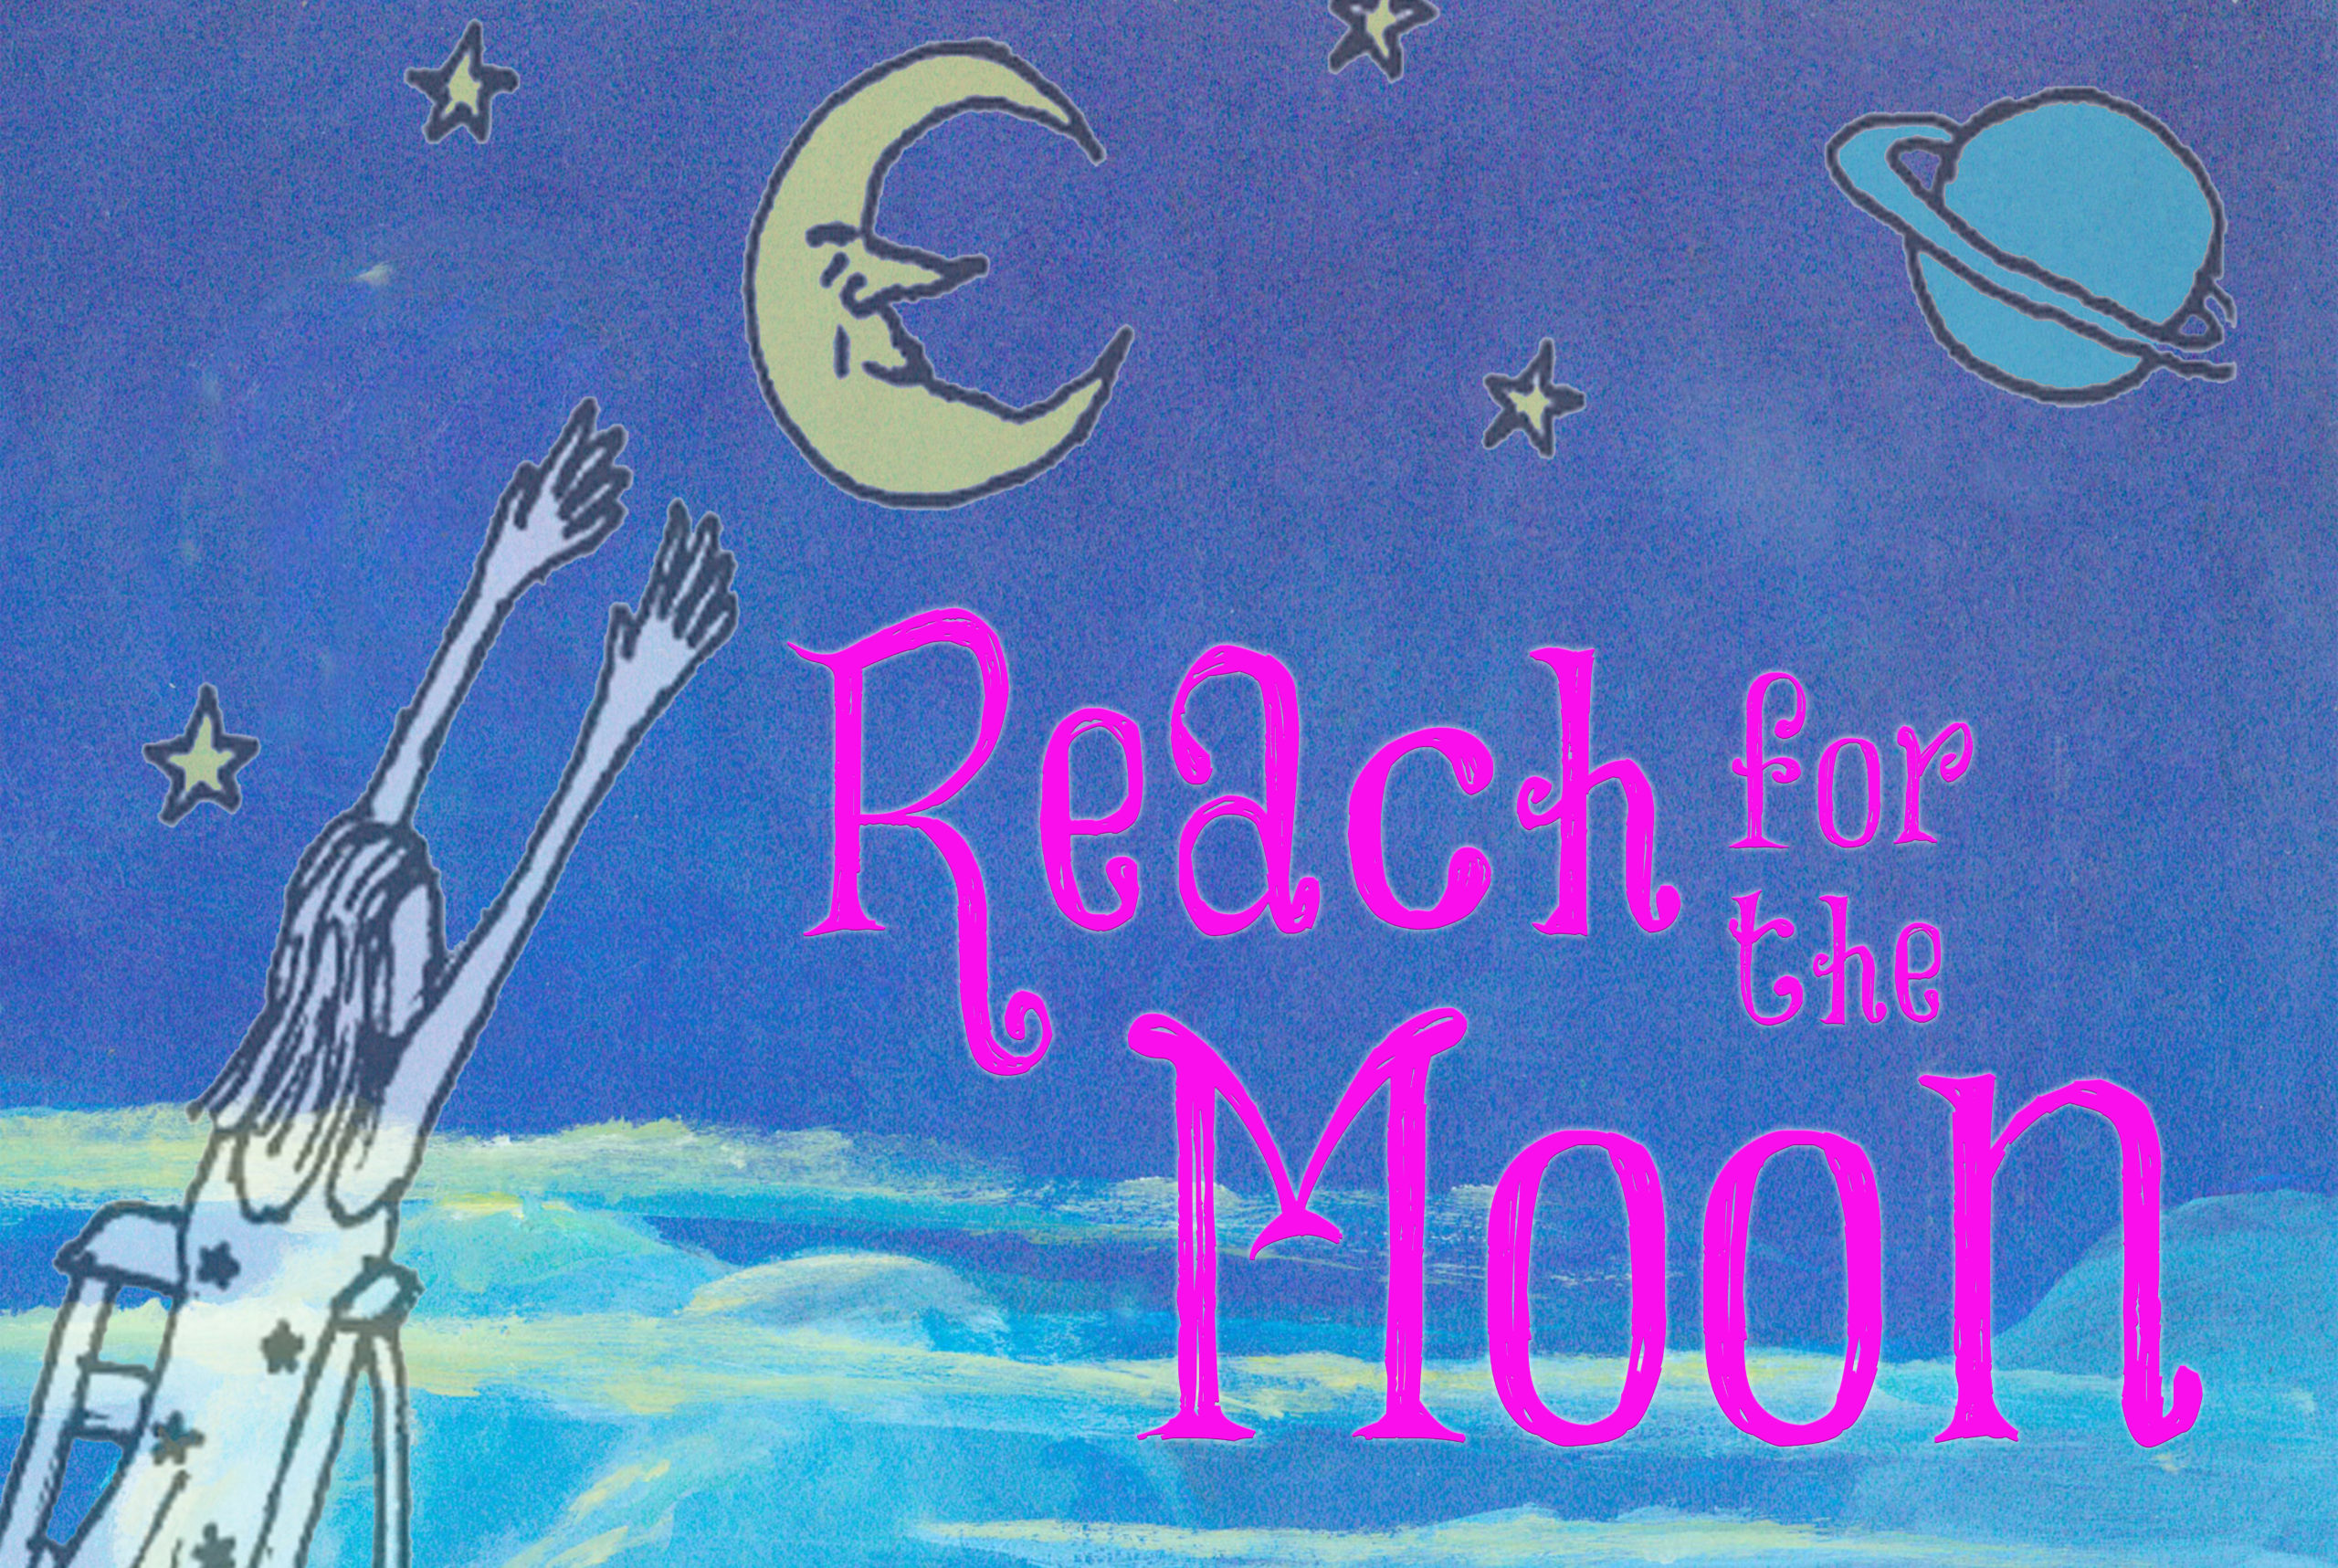 Reach for the Moon